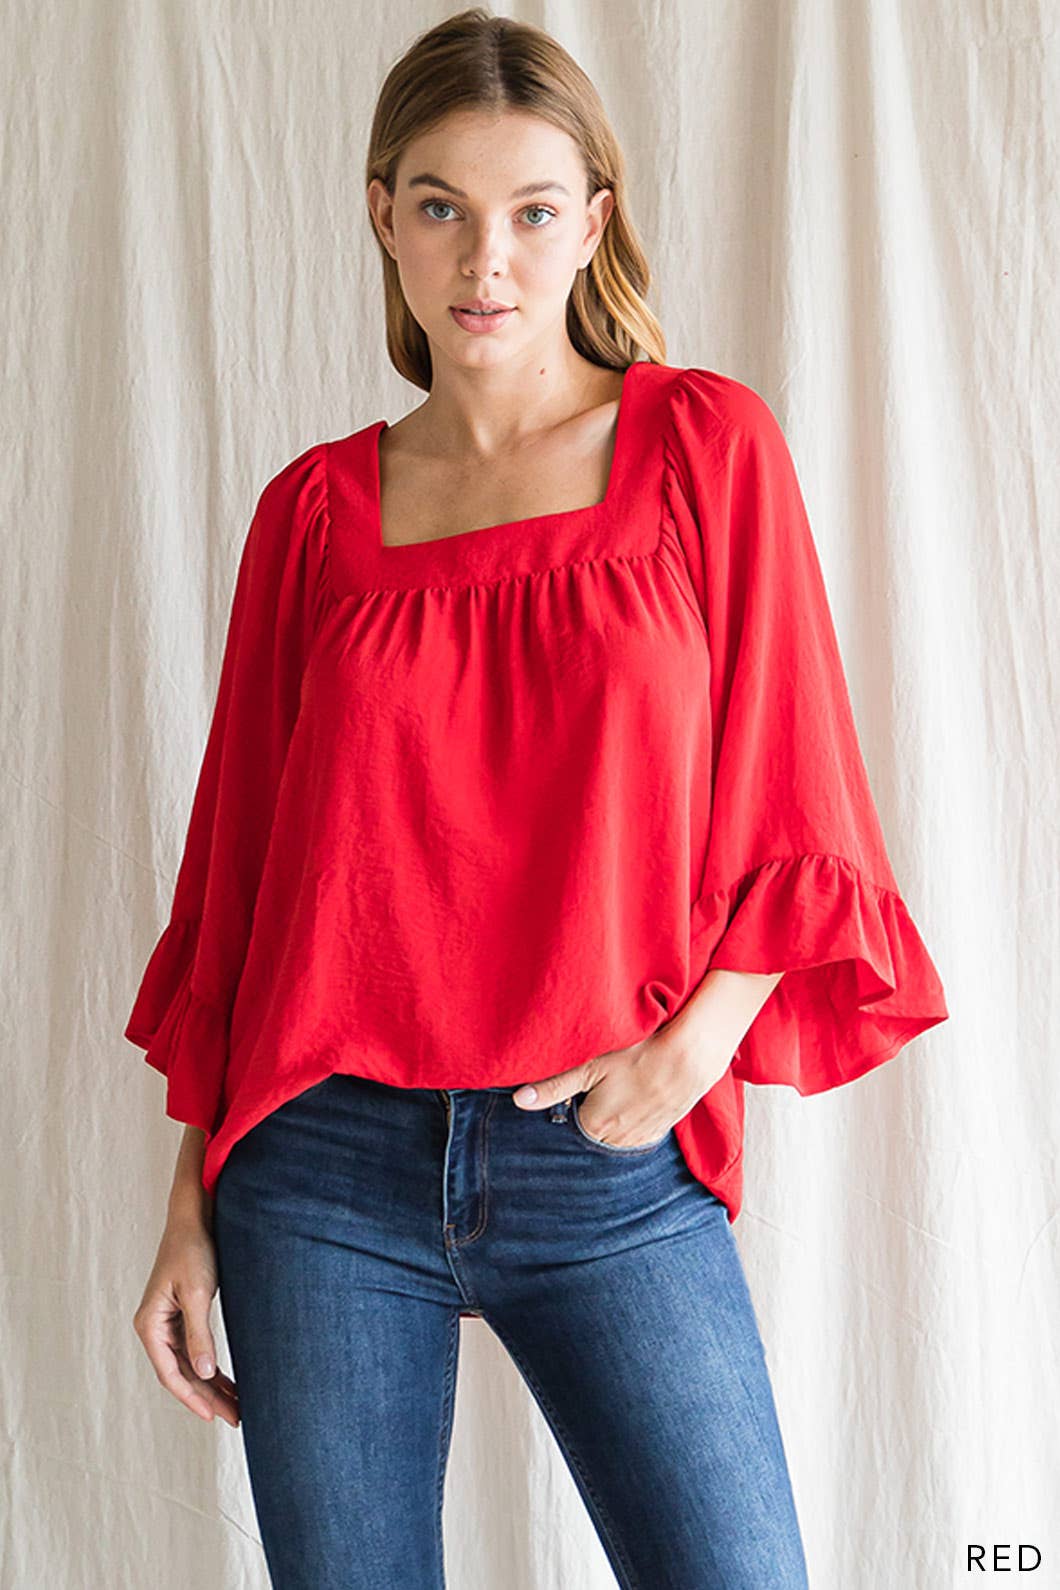 Women's red square neck top featuring 3/4 ruffle detail sleeve.